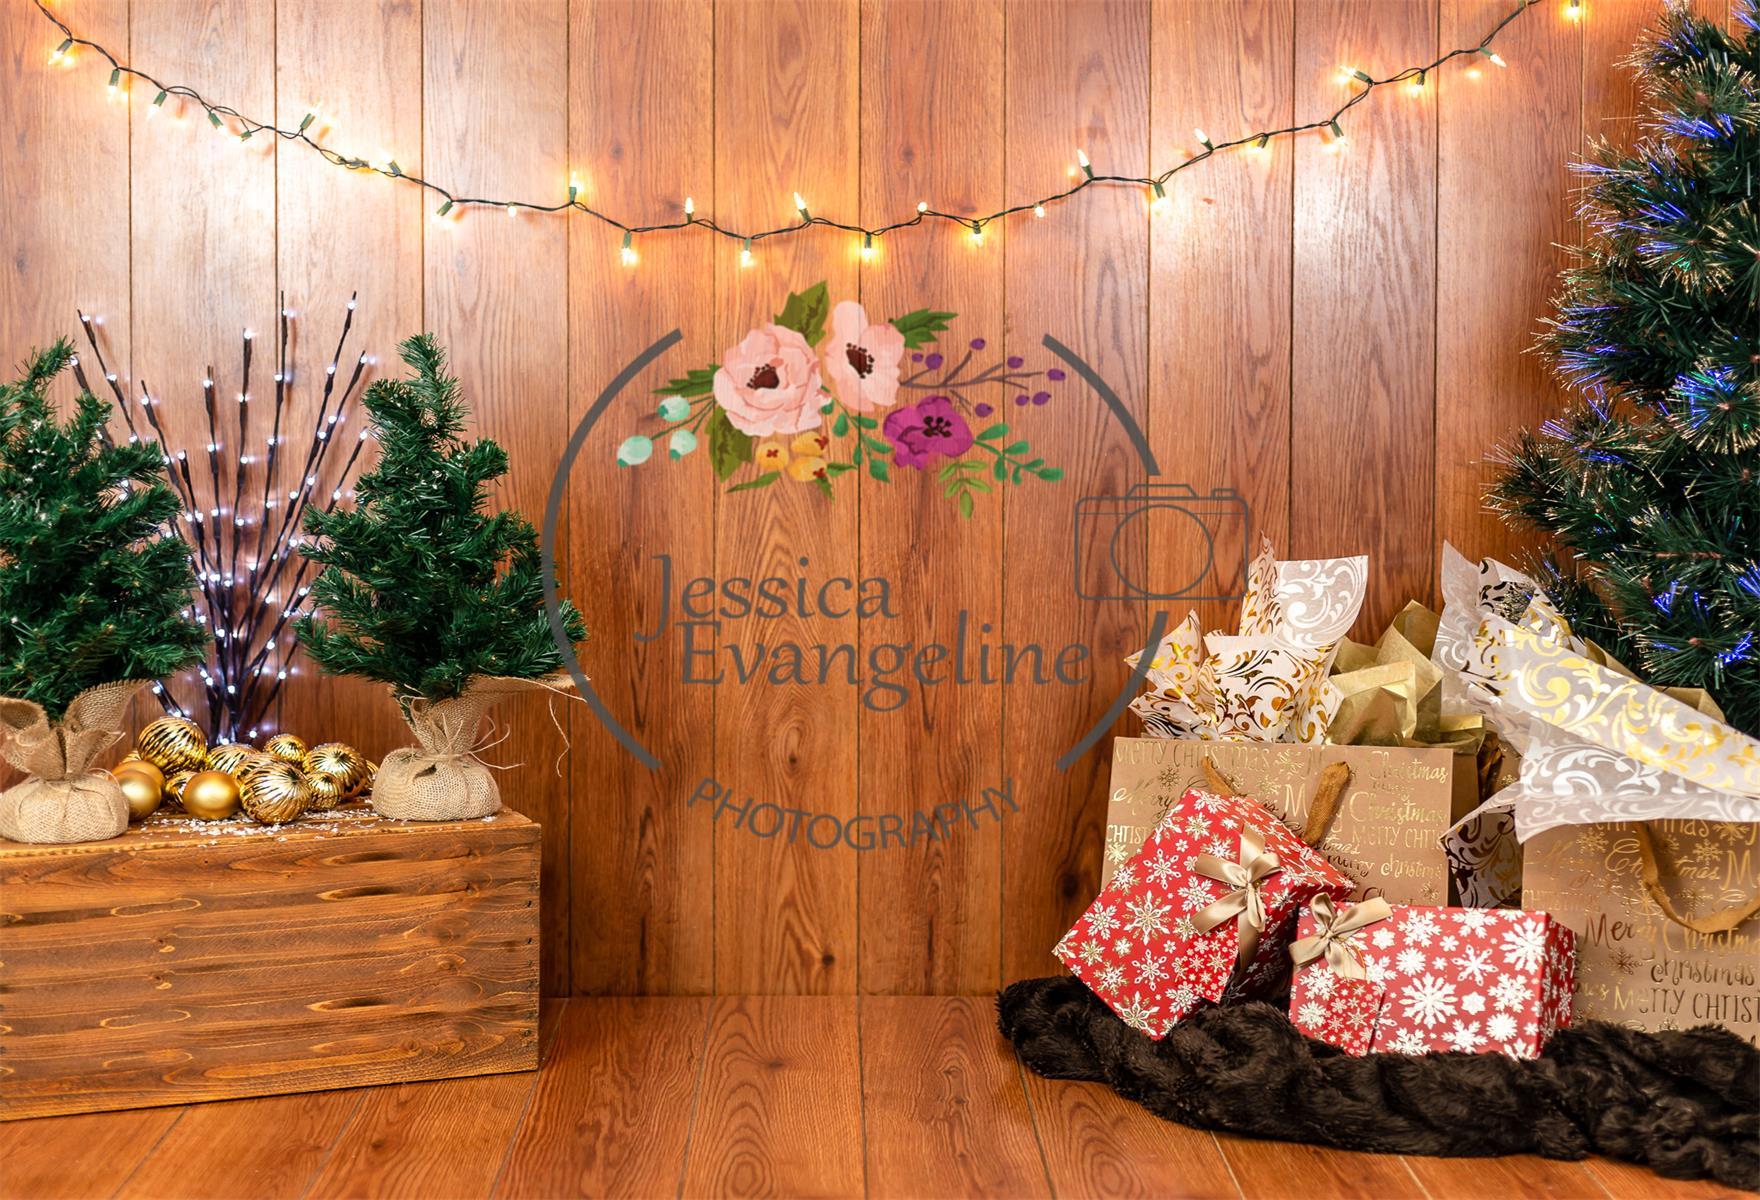 Katebackdrop£ºKate Christmas Tree Wooden Backdrop for Photography Designed By Jessica Evangeline photography